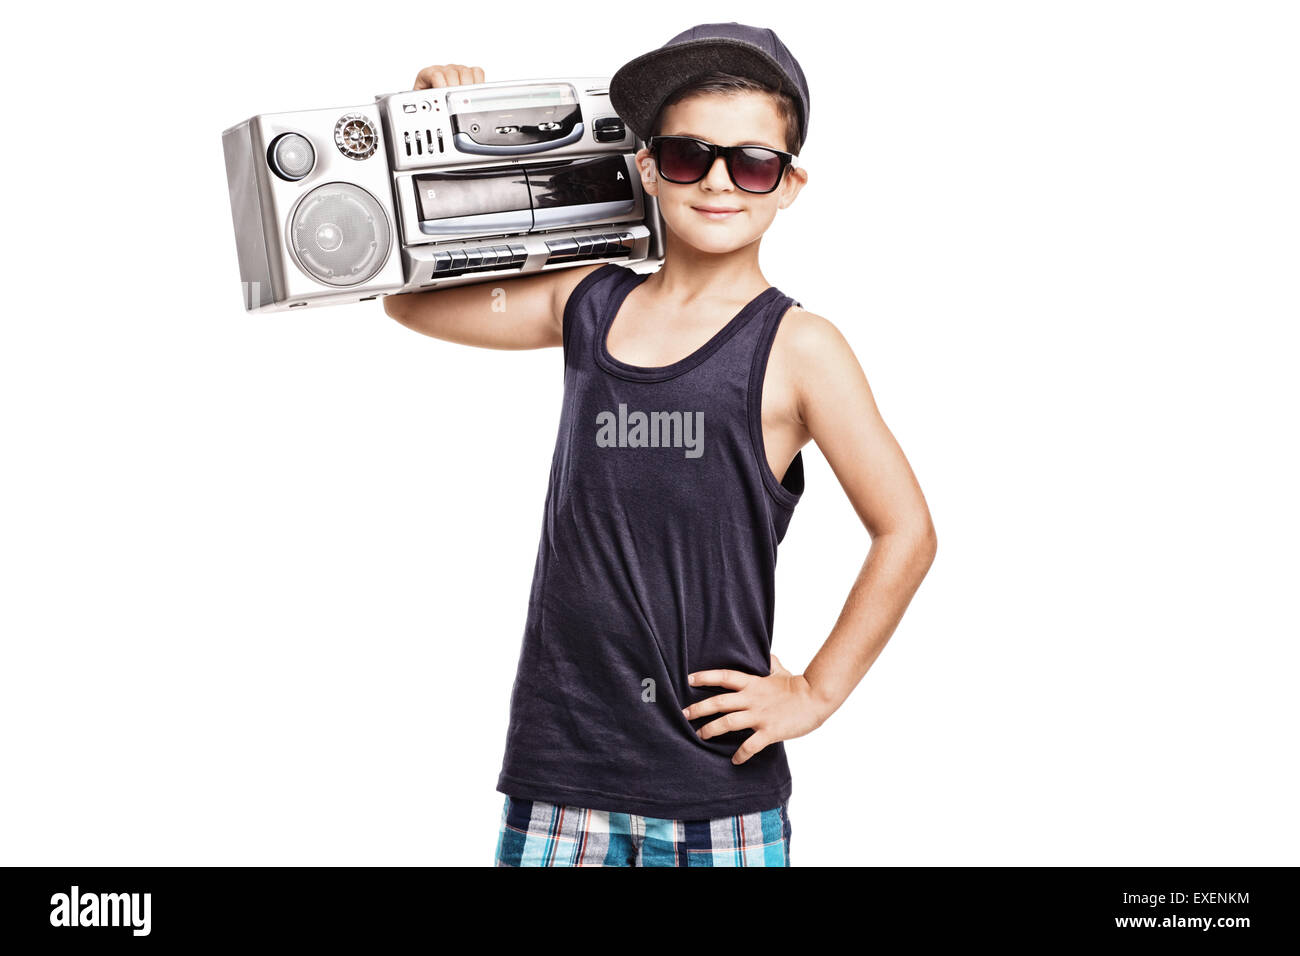 Cool boy in hip hop outfit holding a ghetto blaster over his shoulder and looking at the camera isolated on white background Stock Photo